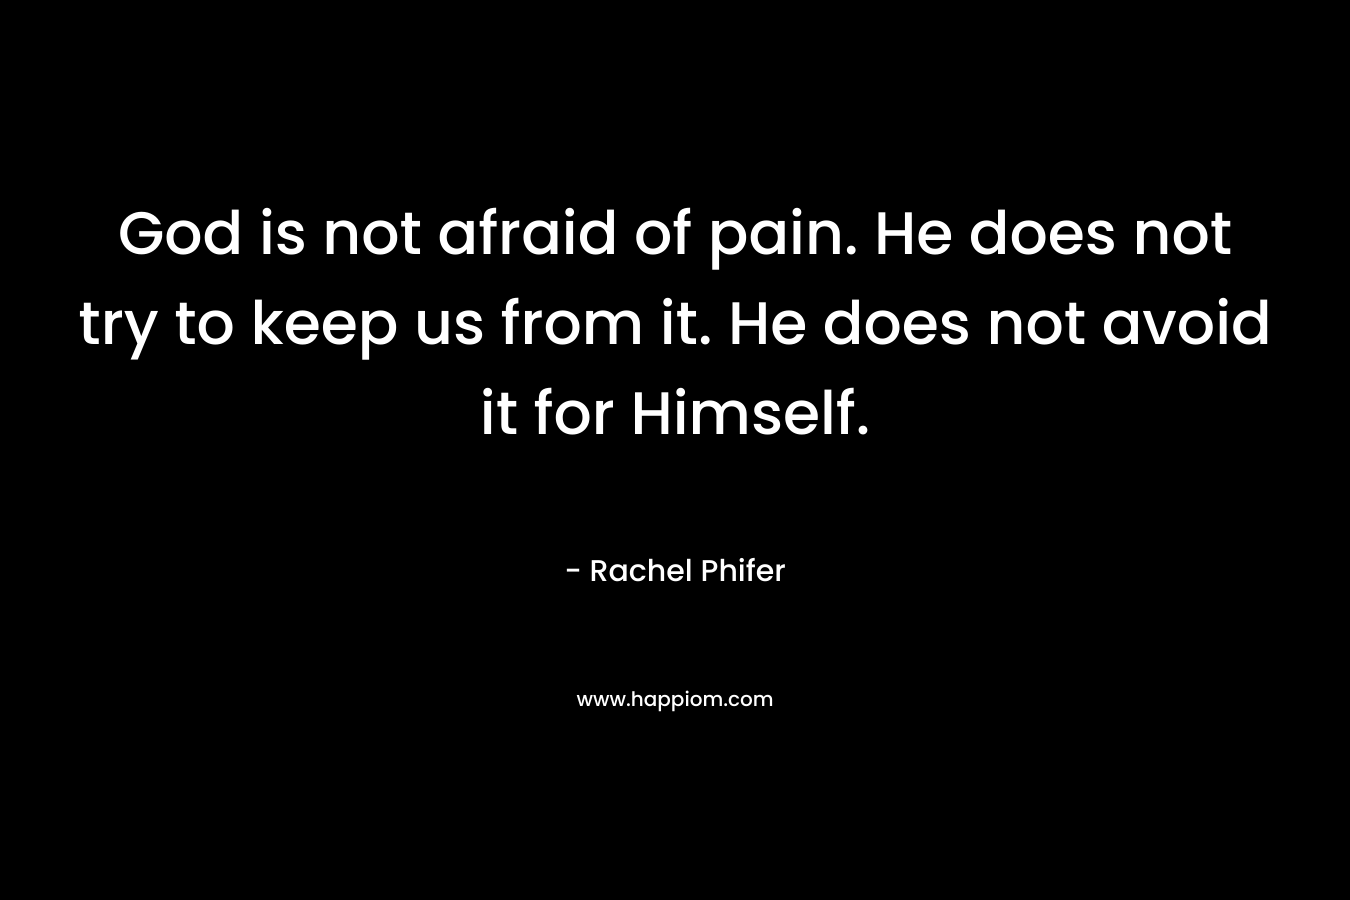 God is not afraid of pain. He does not try to keep us from it. He does not avoid it for Himself.